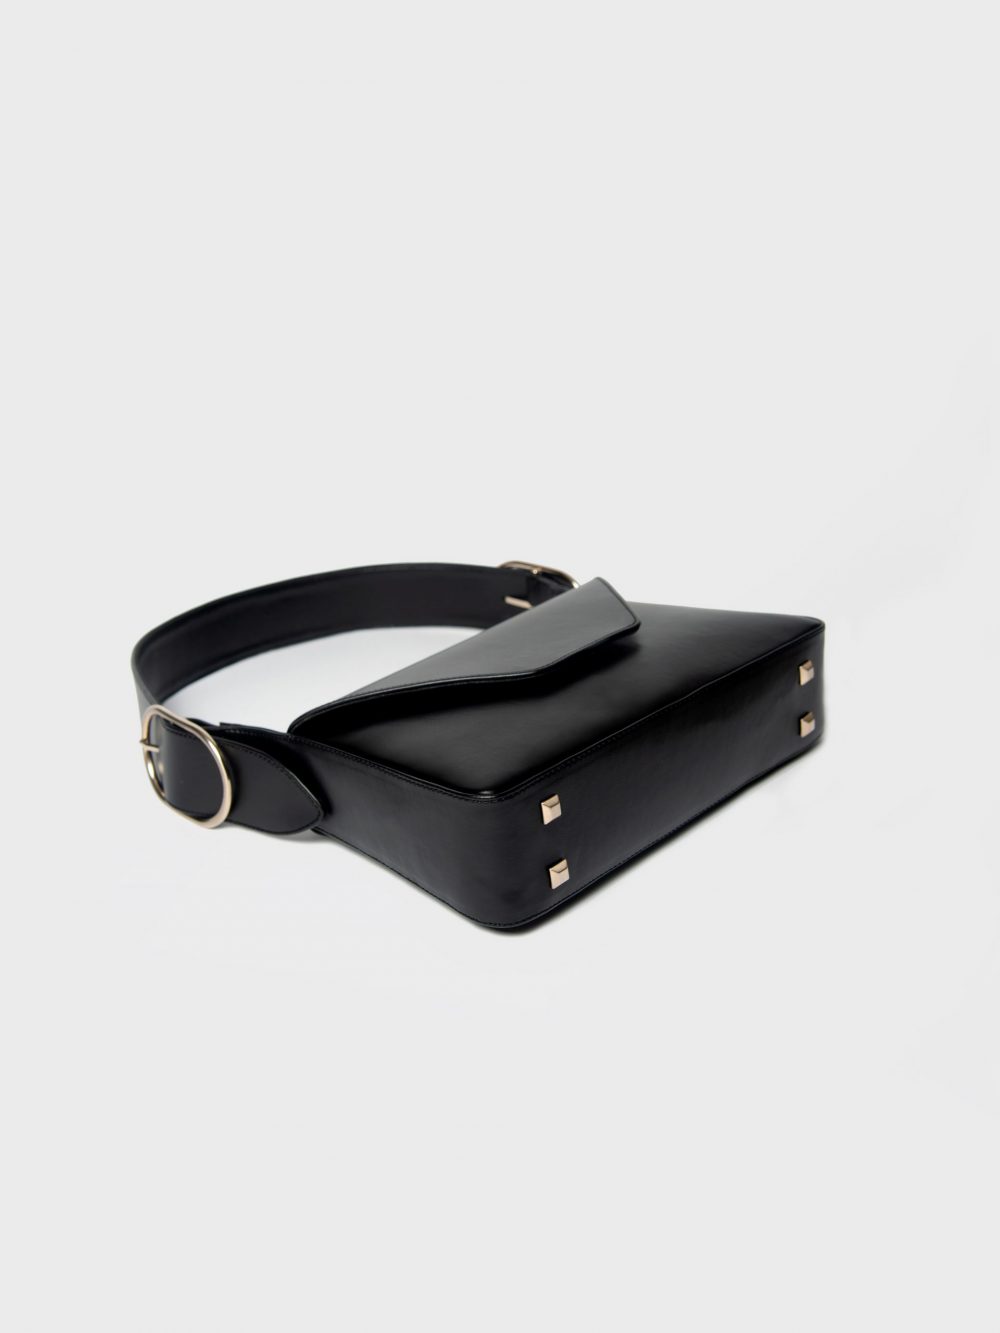 Le poche 01 the black daily bag lying view